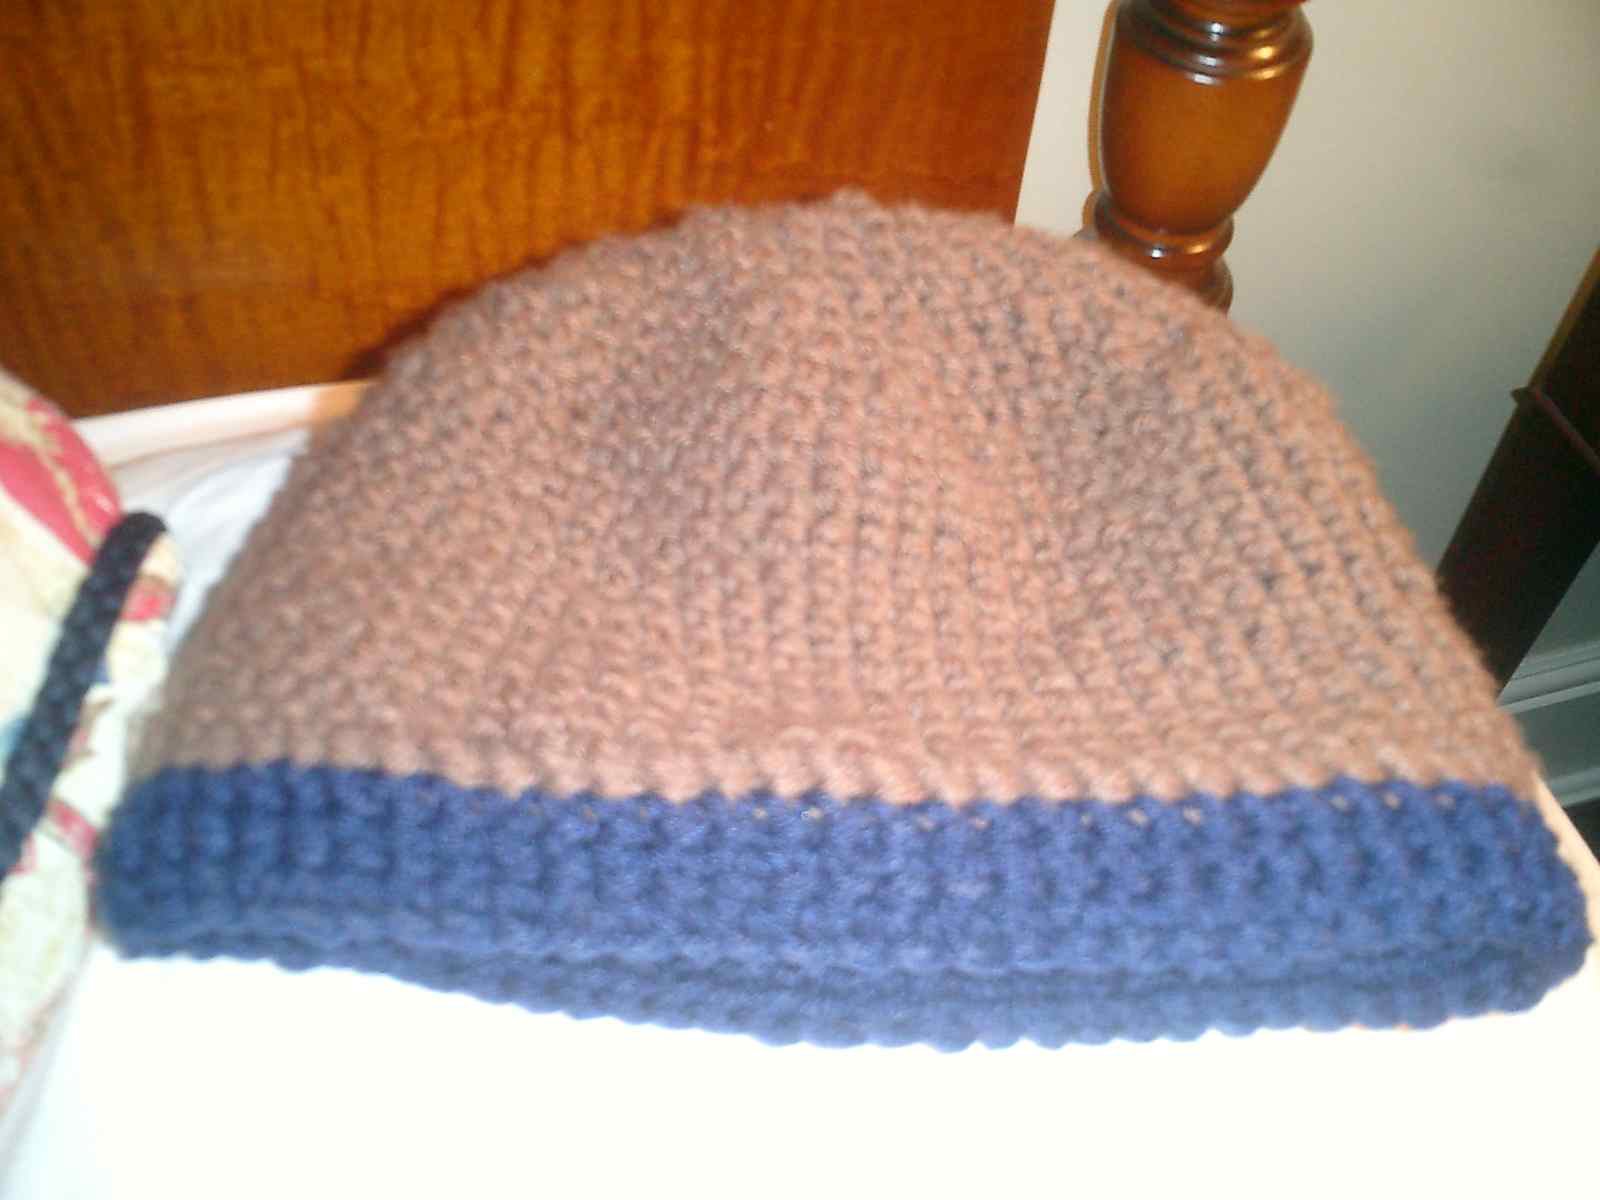 my second hat!